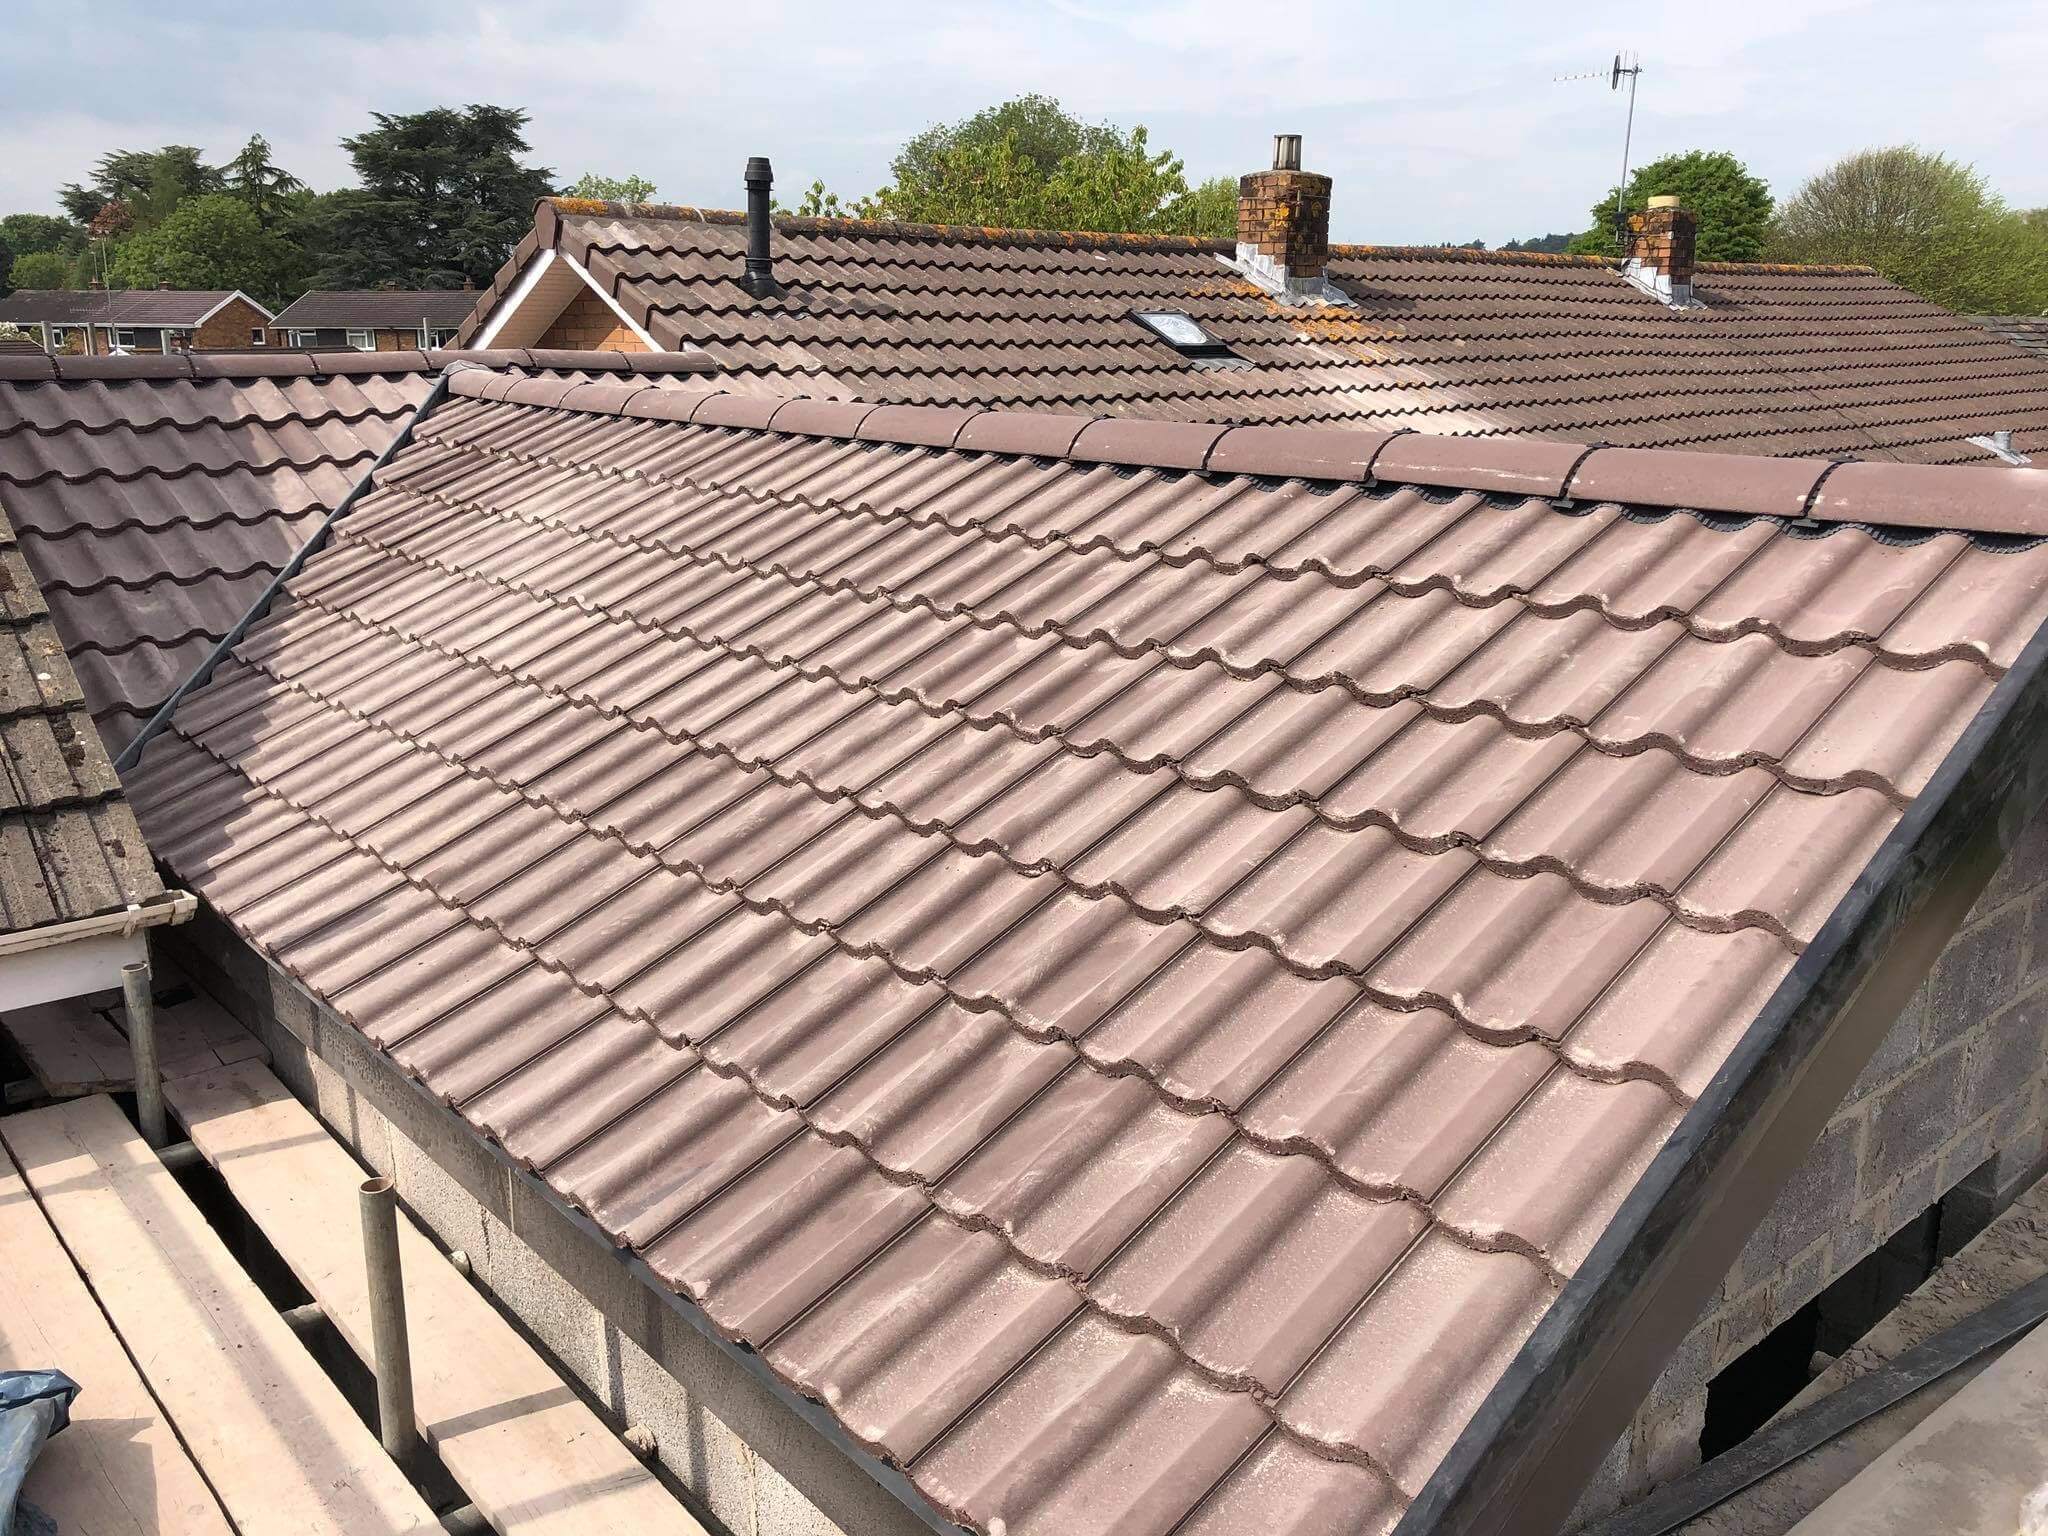 New Tiled Roofing